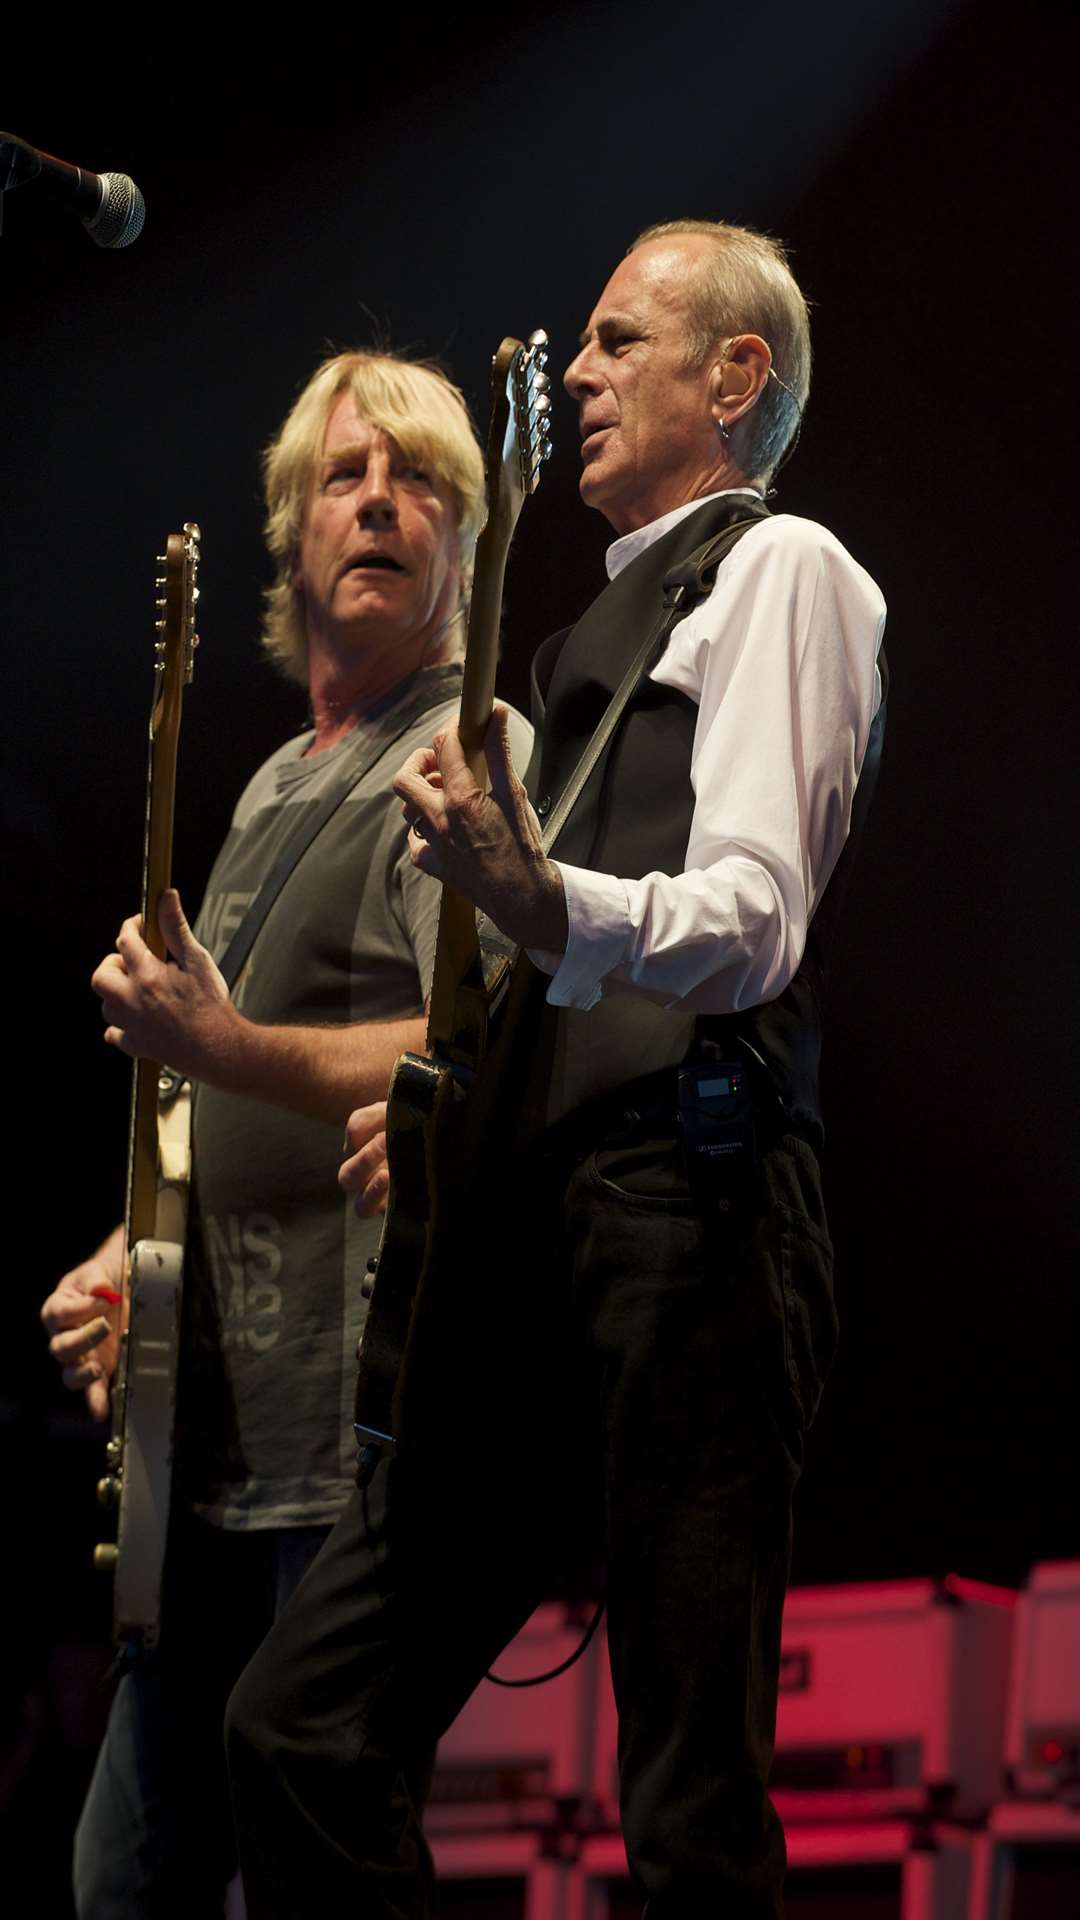 Rick Parfitt, left, and Francis Rossi. Status Quo at the Rochester Castle Concerts in 2013